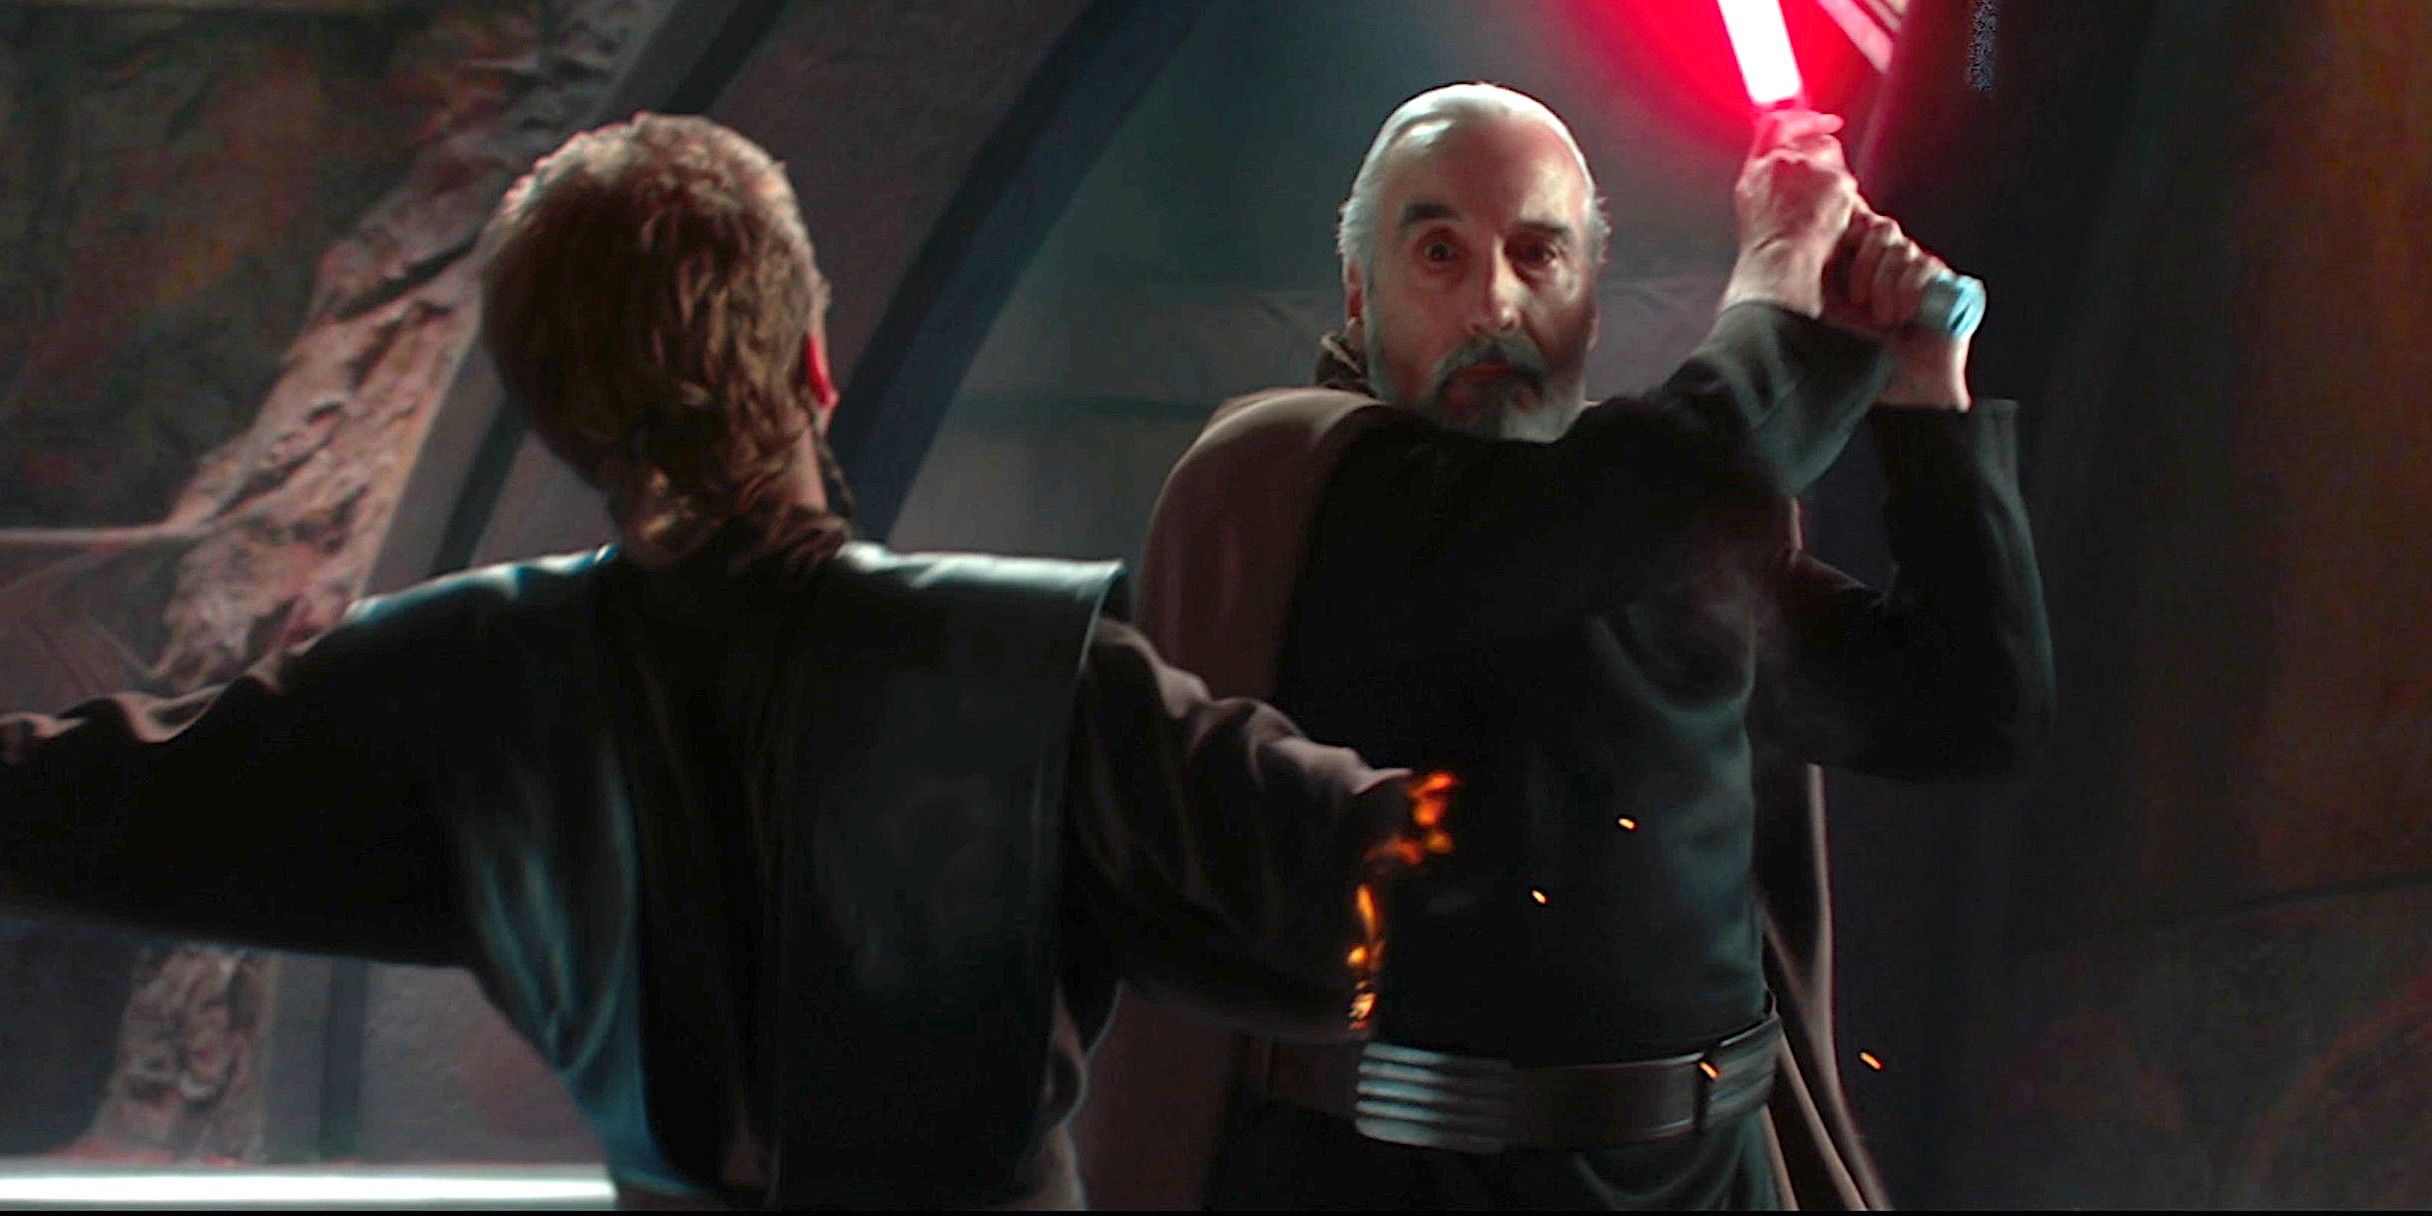 Anakin Skywalker loses his arm to Count Dooku in Star Wars Episode 2 Attack of the Clones